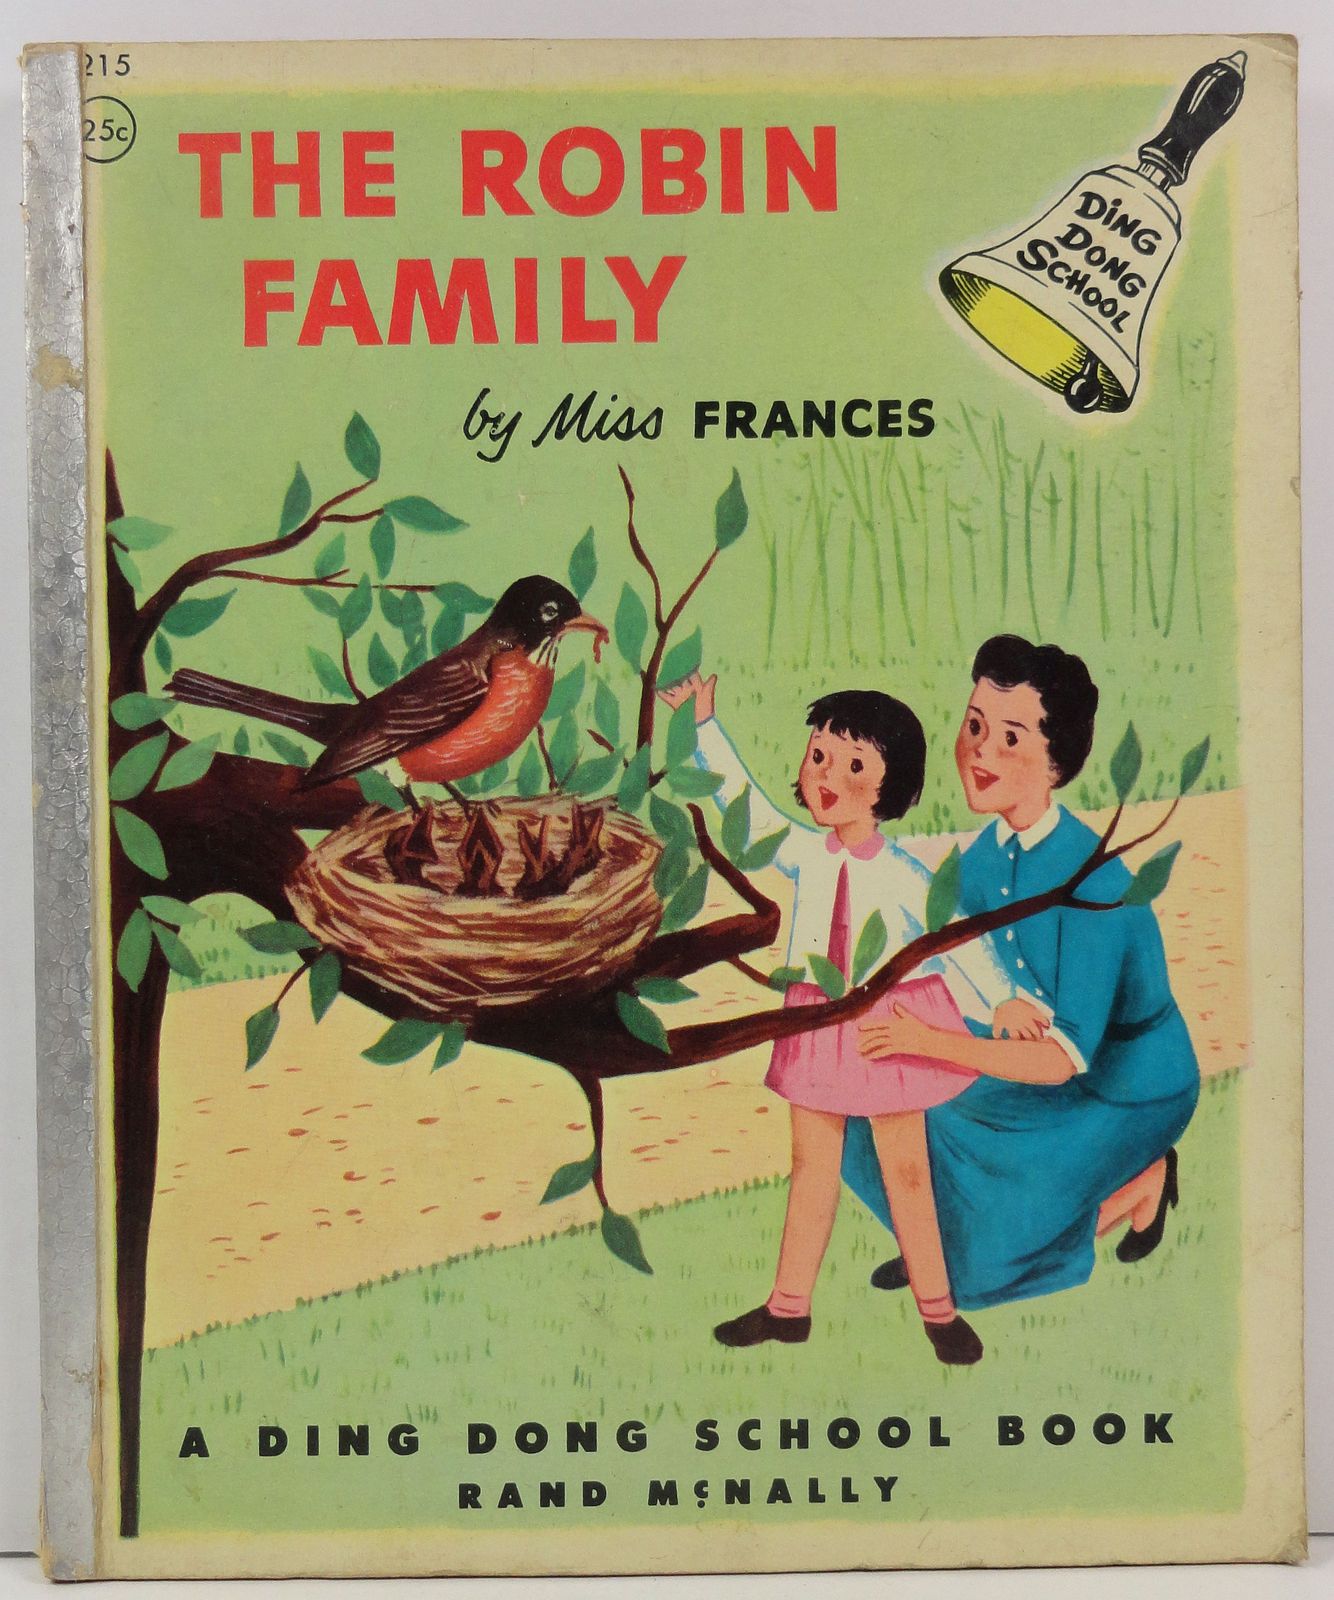 The Robin Family A Ding Dong School Book - $5.99